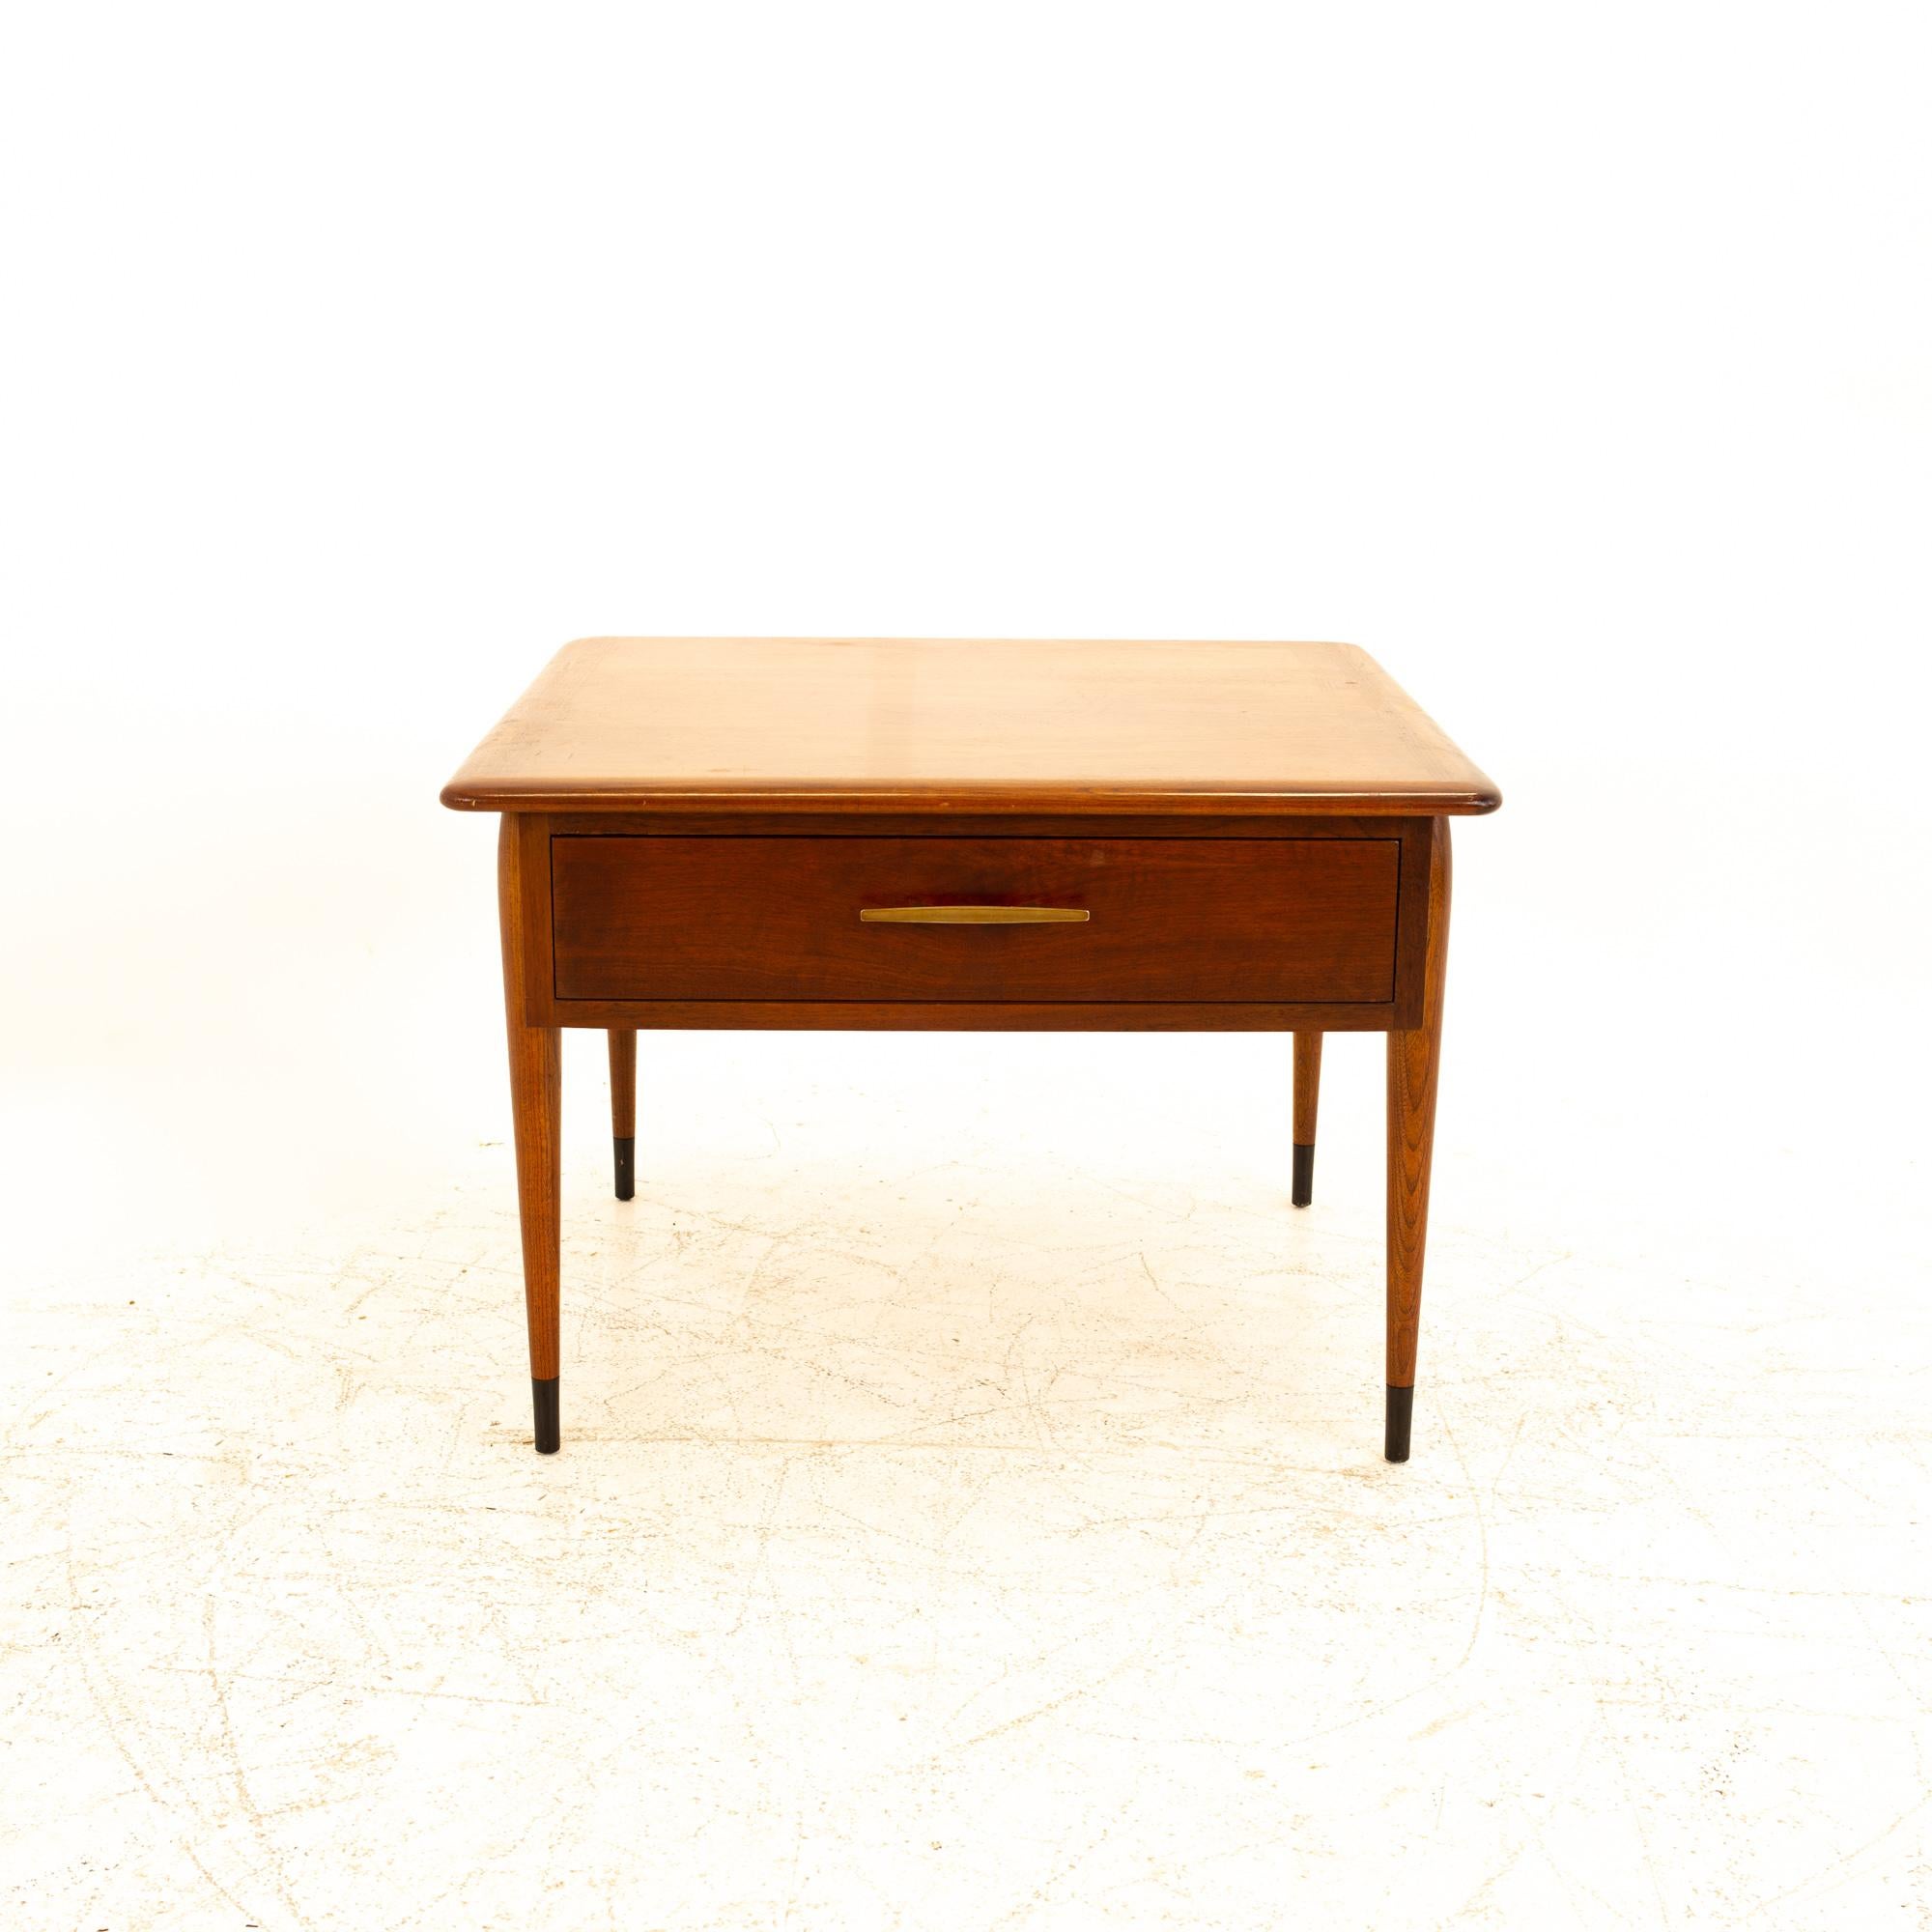 Andre Bus for Lane Acclaim Mid Century walnut dovetail square side end table with drawer
Side table measures: 28 wide x 28 deep x 20 high

All pieces of furniture can be had in what we call restored vintage condition. That means the piece is